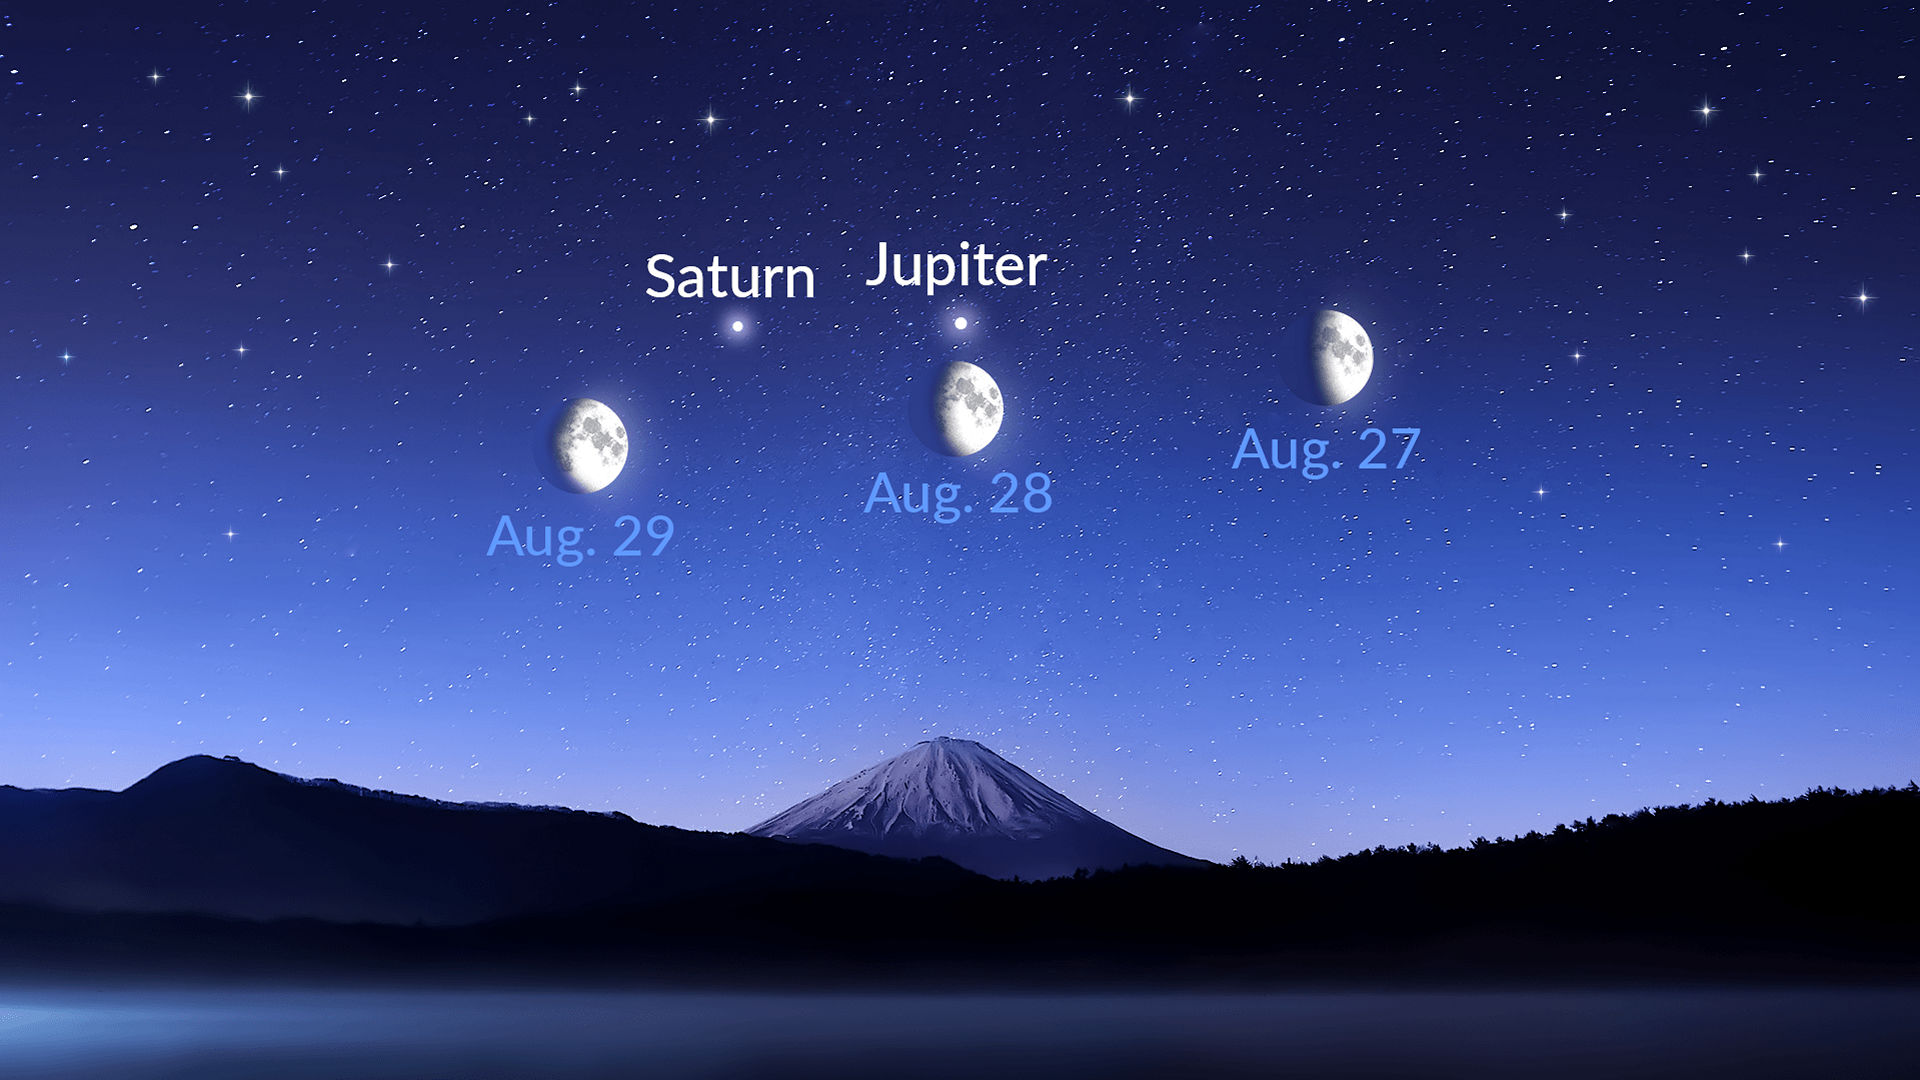 The Moon, Saturn and Jupiter meet in the night sky